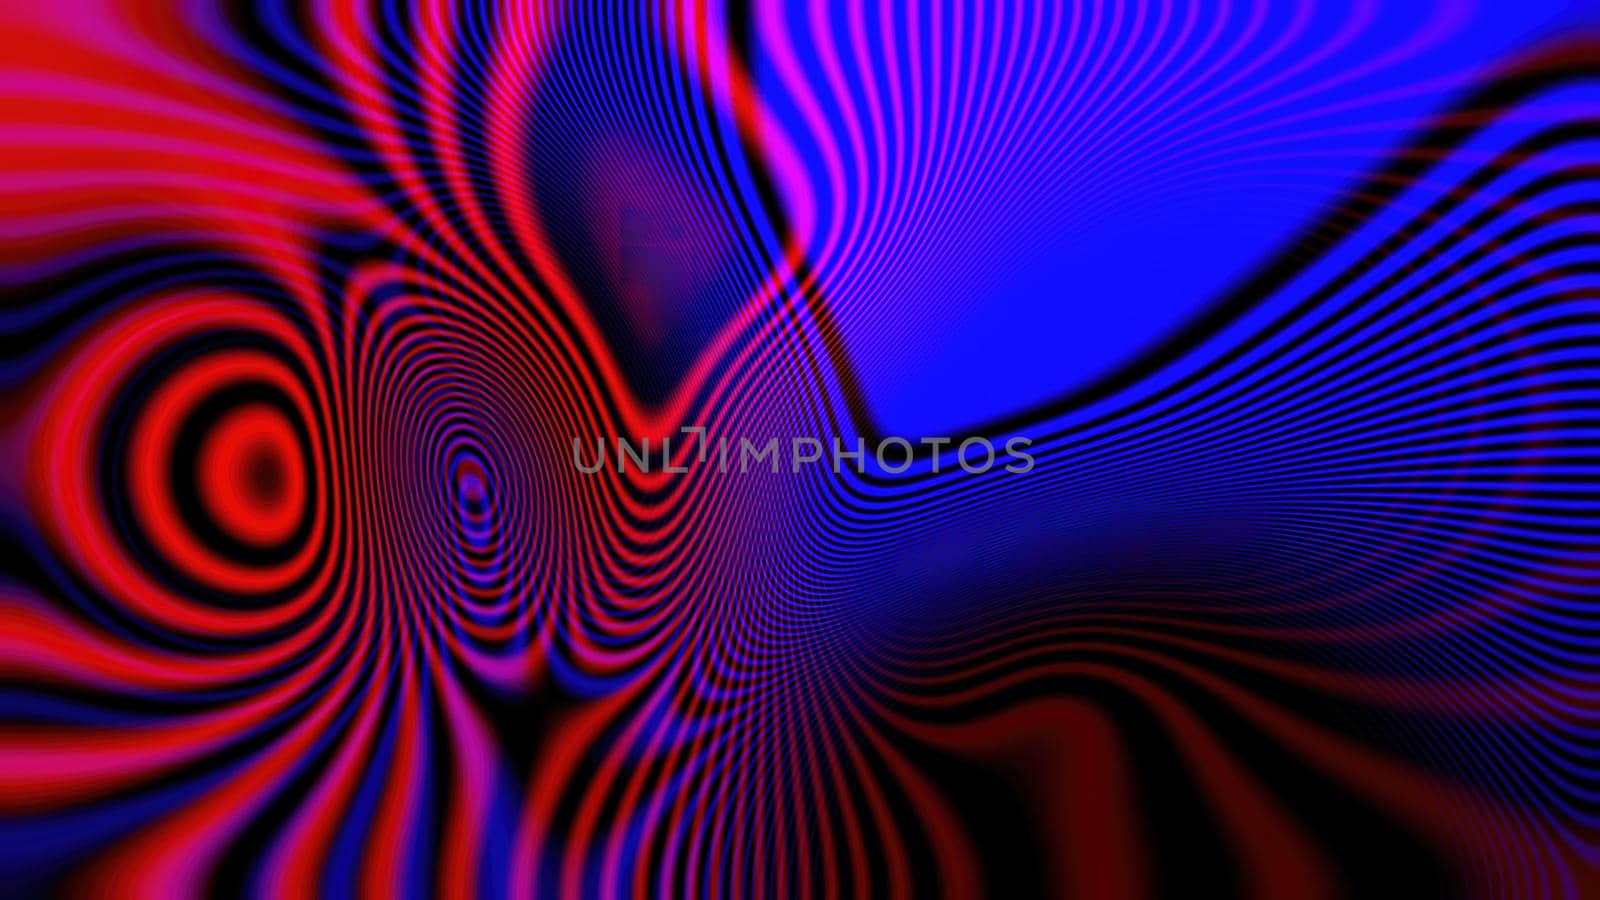 Zebra red and blue contour shadow abstract background